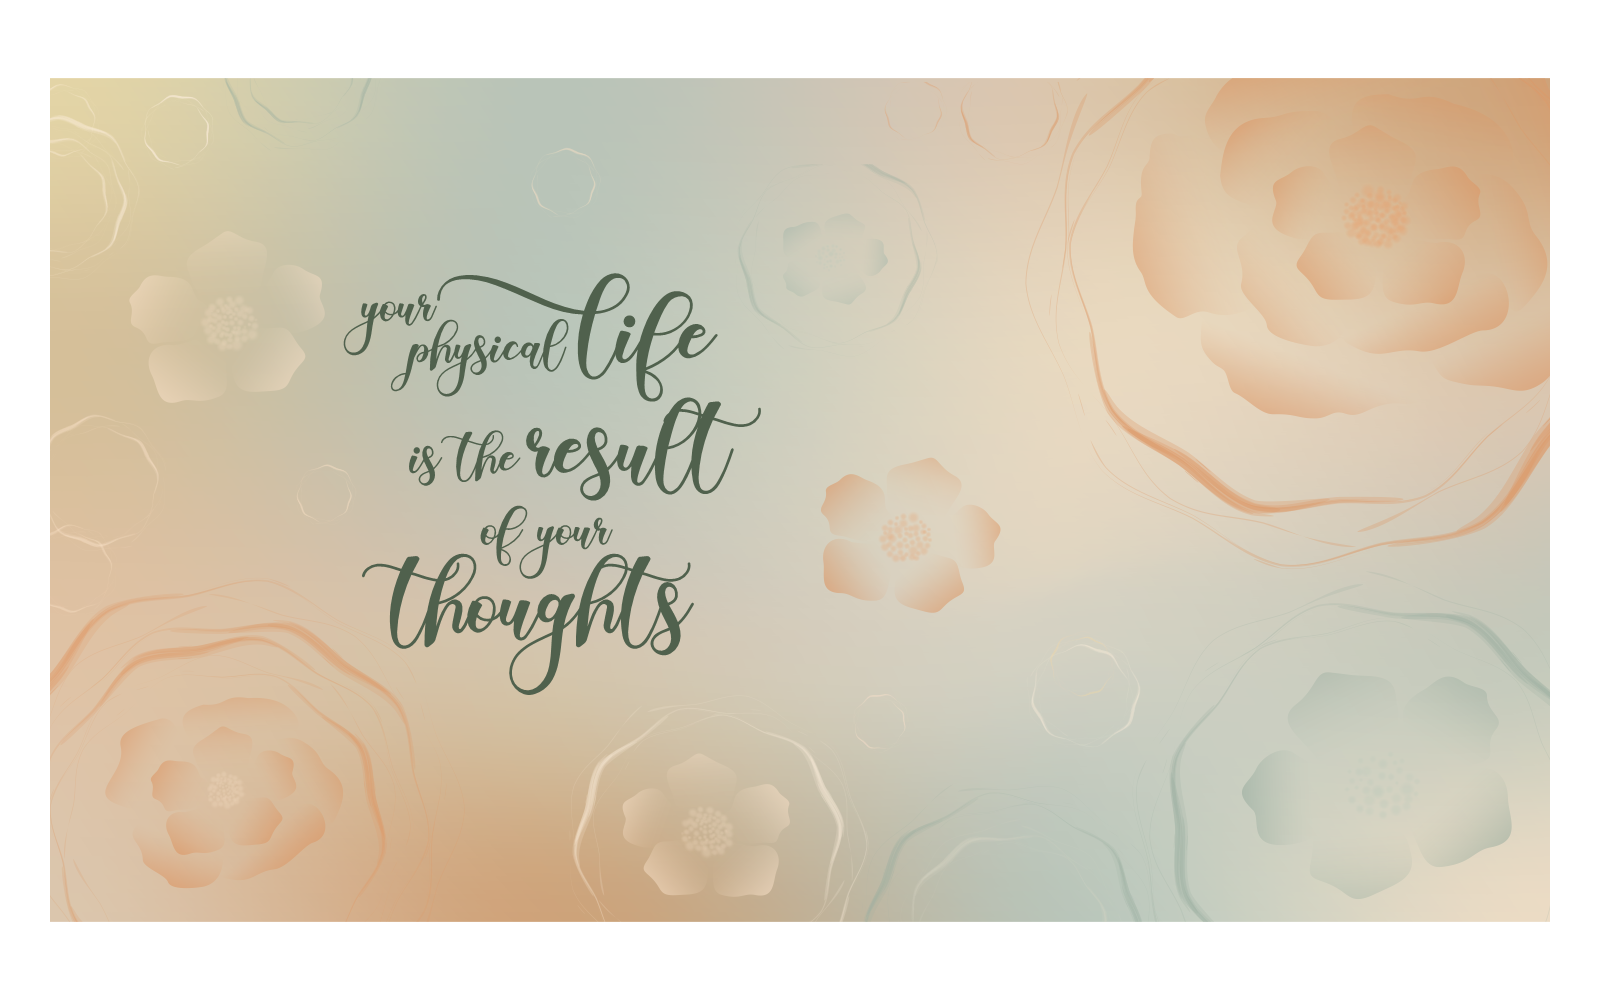 Floral Inspirational Background image 14400x8100px with Message of Power of Thoughts